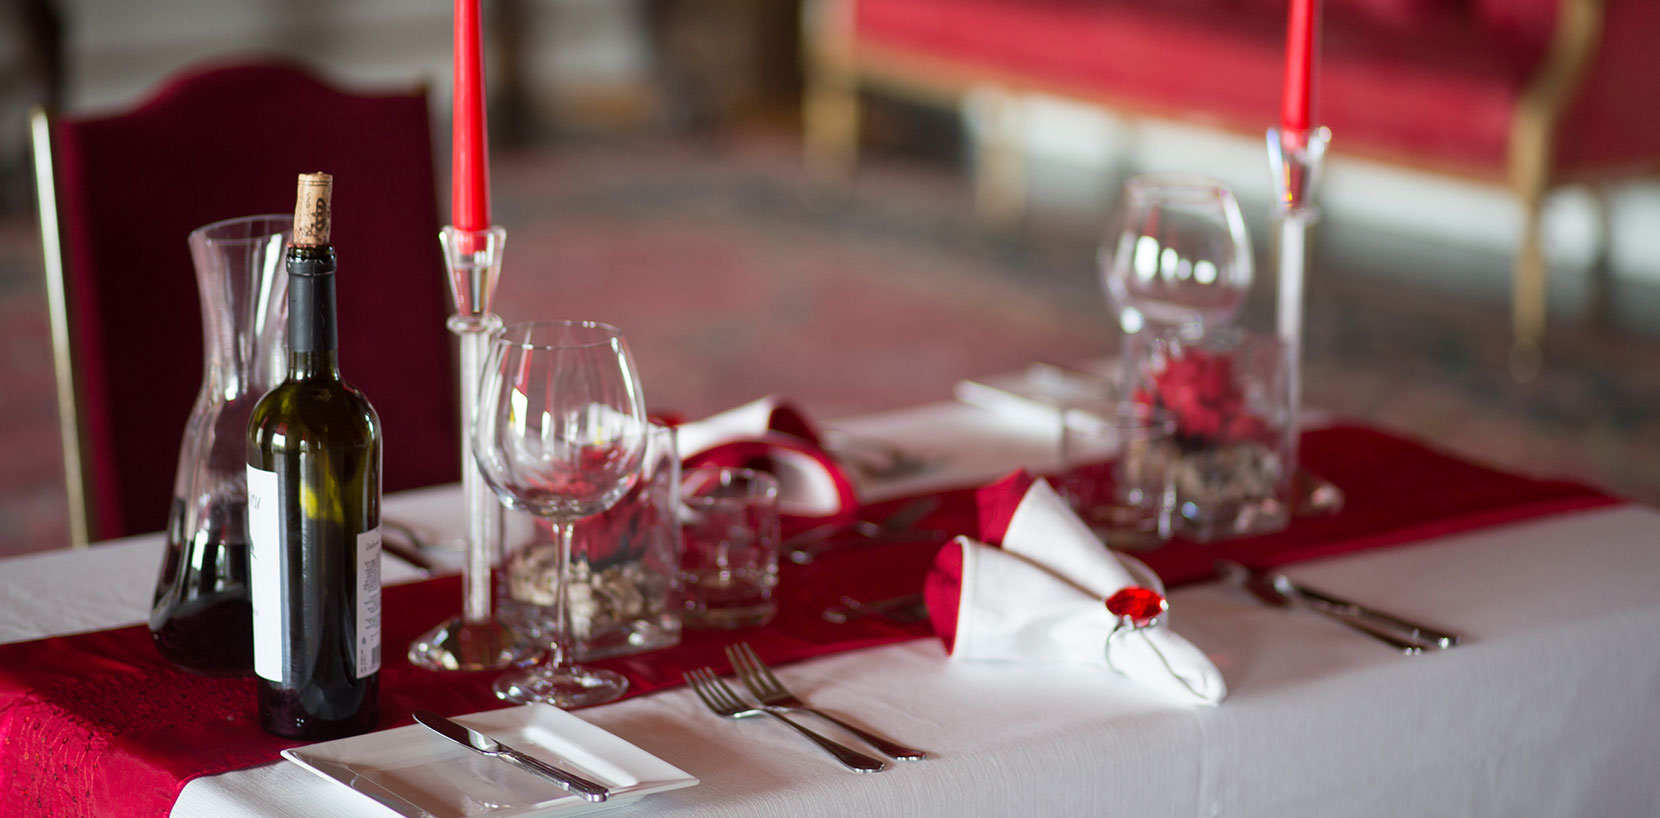 Dinner place setting at Ragley Hall